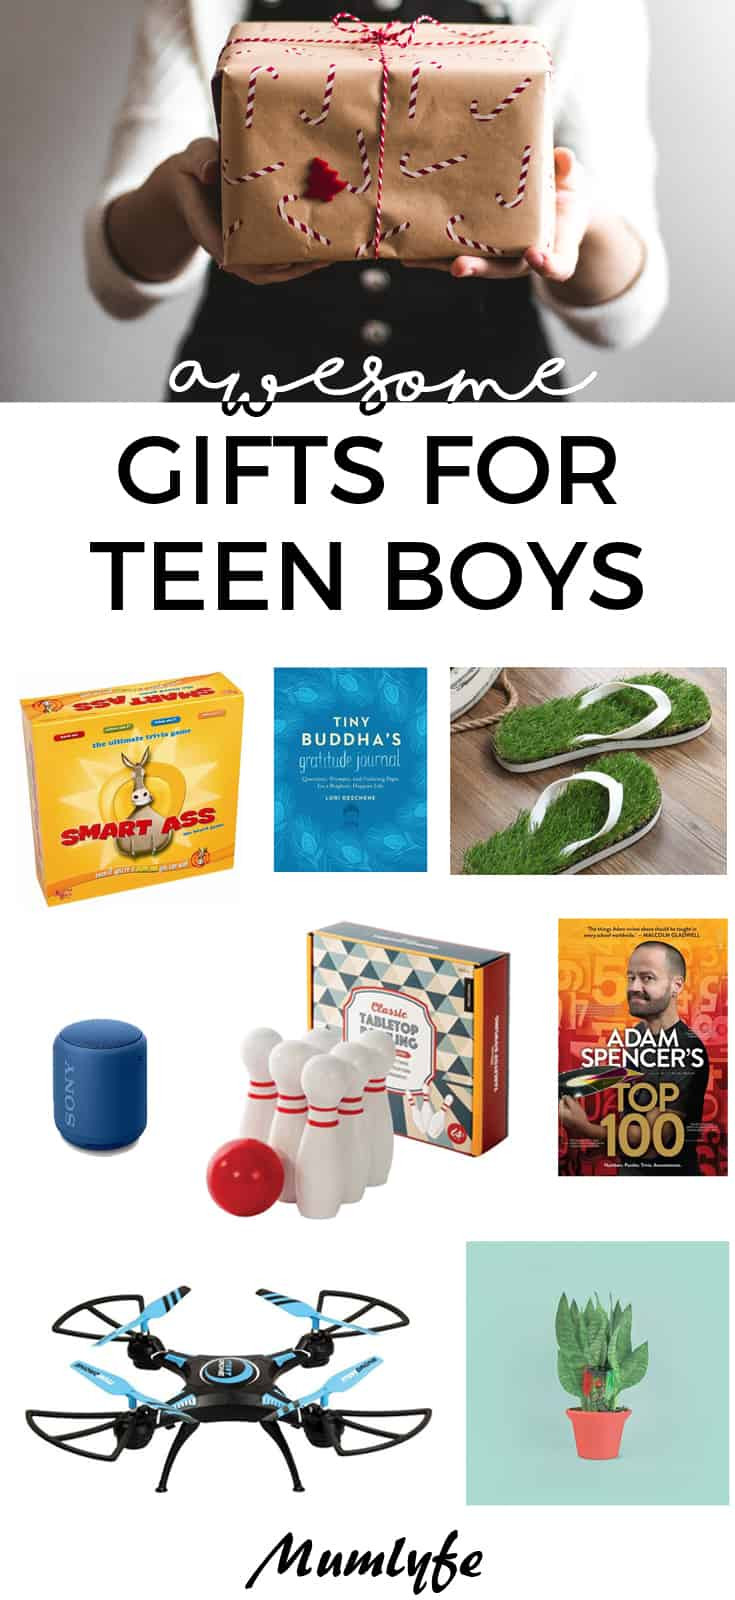 Boys Gift Ideas
 Awesome t ideas for teen boys they will love anything